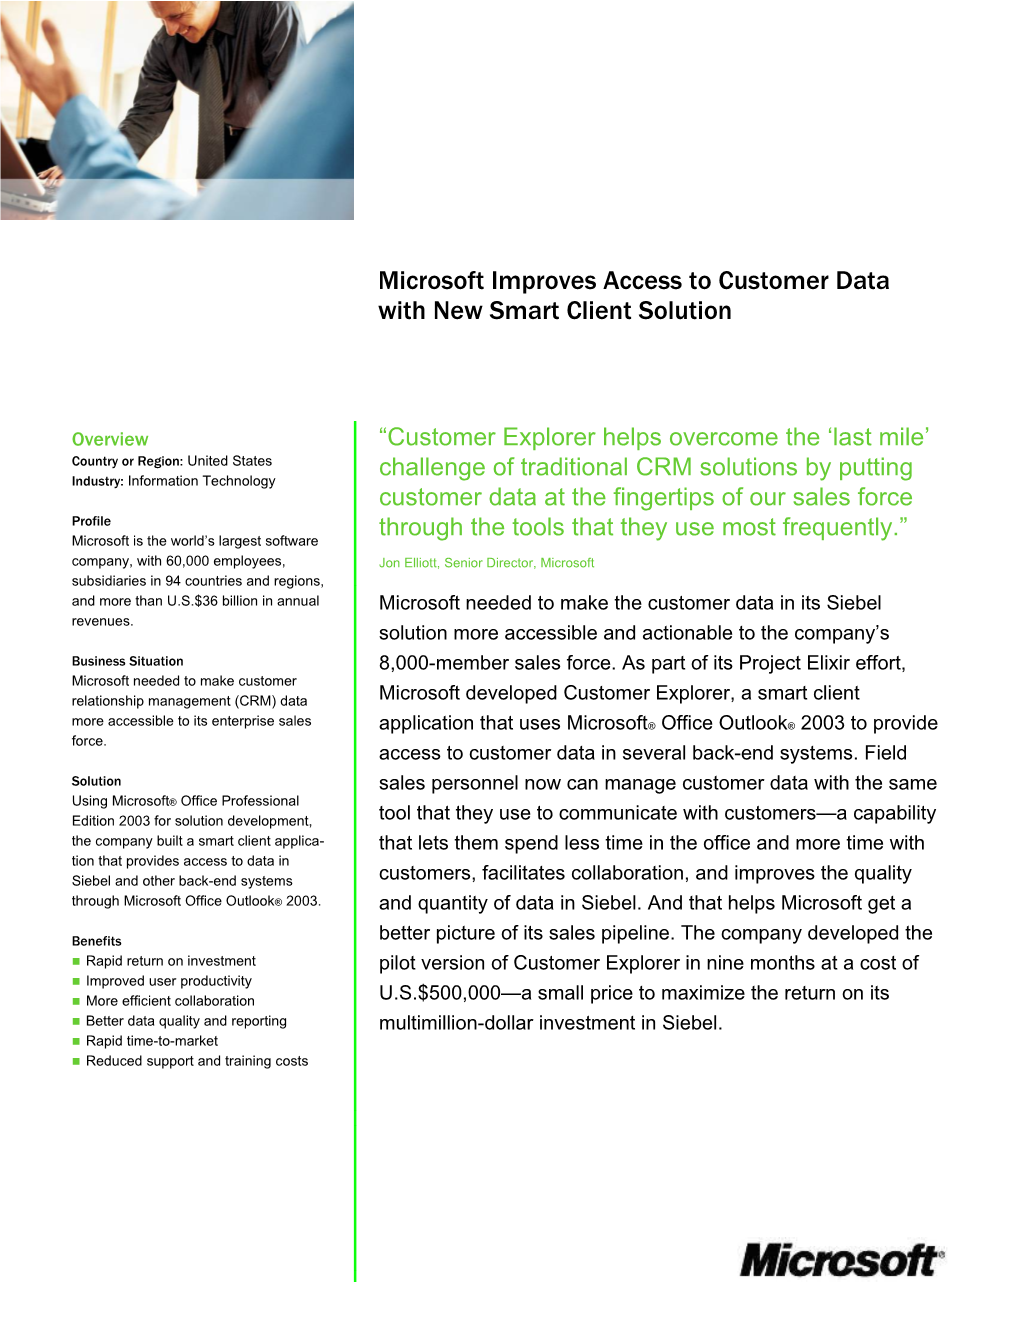 Microsoft Improves Access to Customer Data with New Smart Client Solution